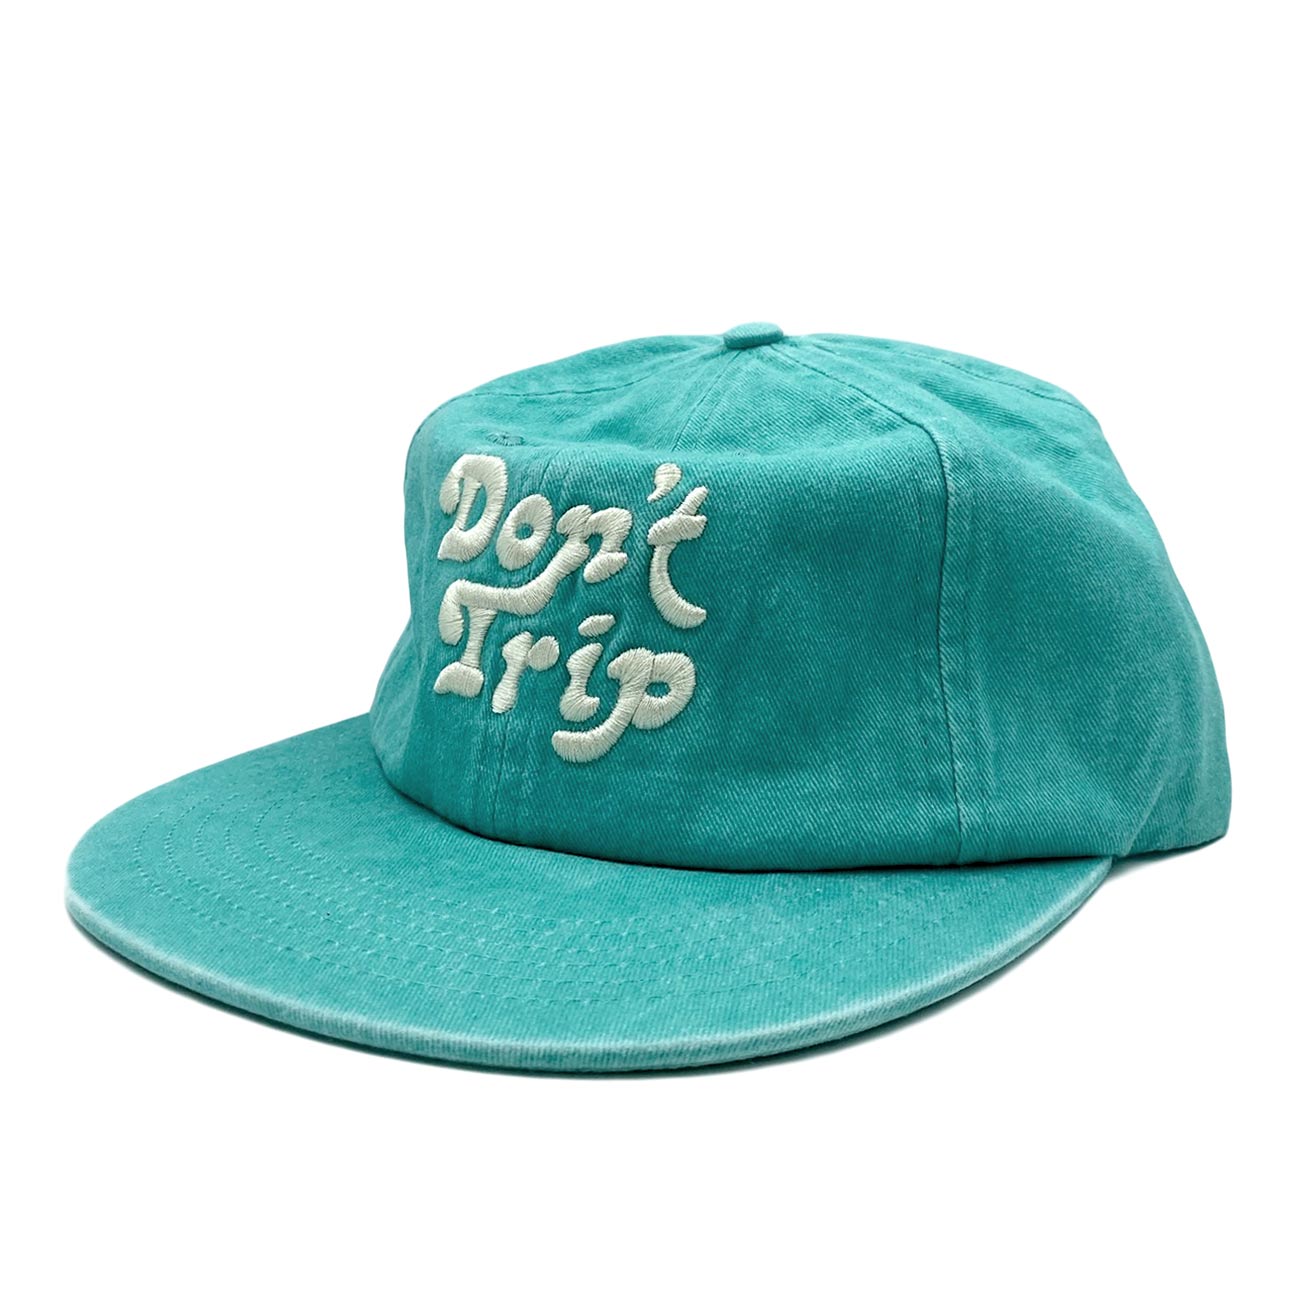 Don't Trip washed teal hat with white embroidered Don't Trip logo on white background - Free & Easy